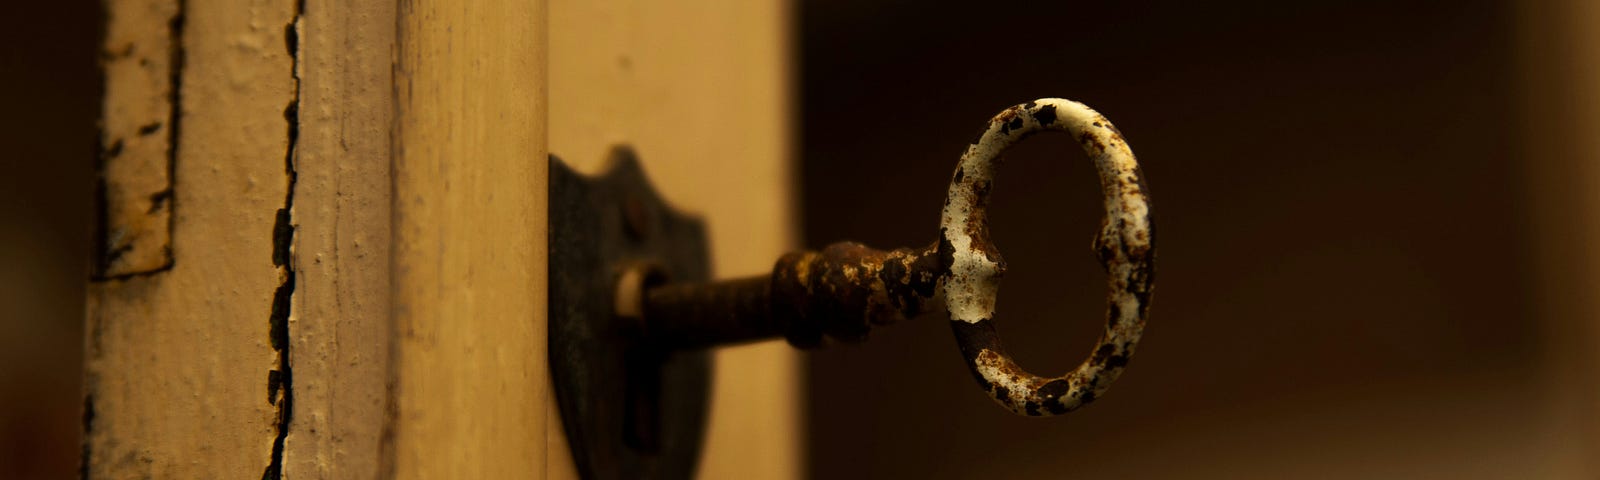 An interesting looking brass key in an old wooden door — sepia photograph.